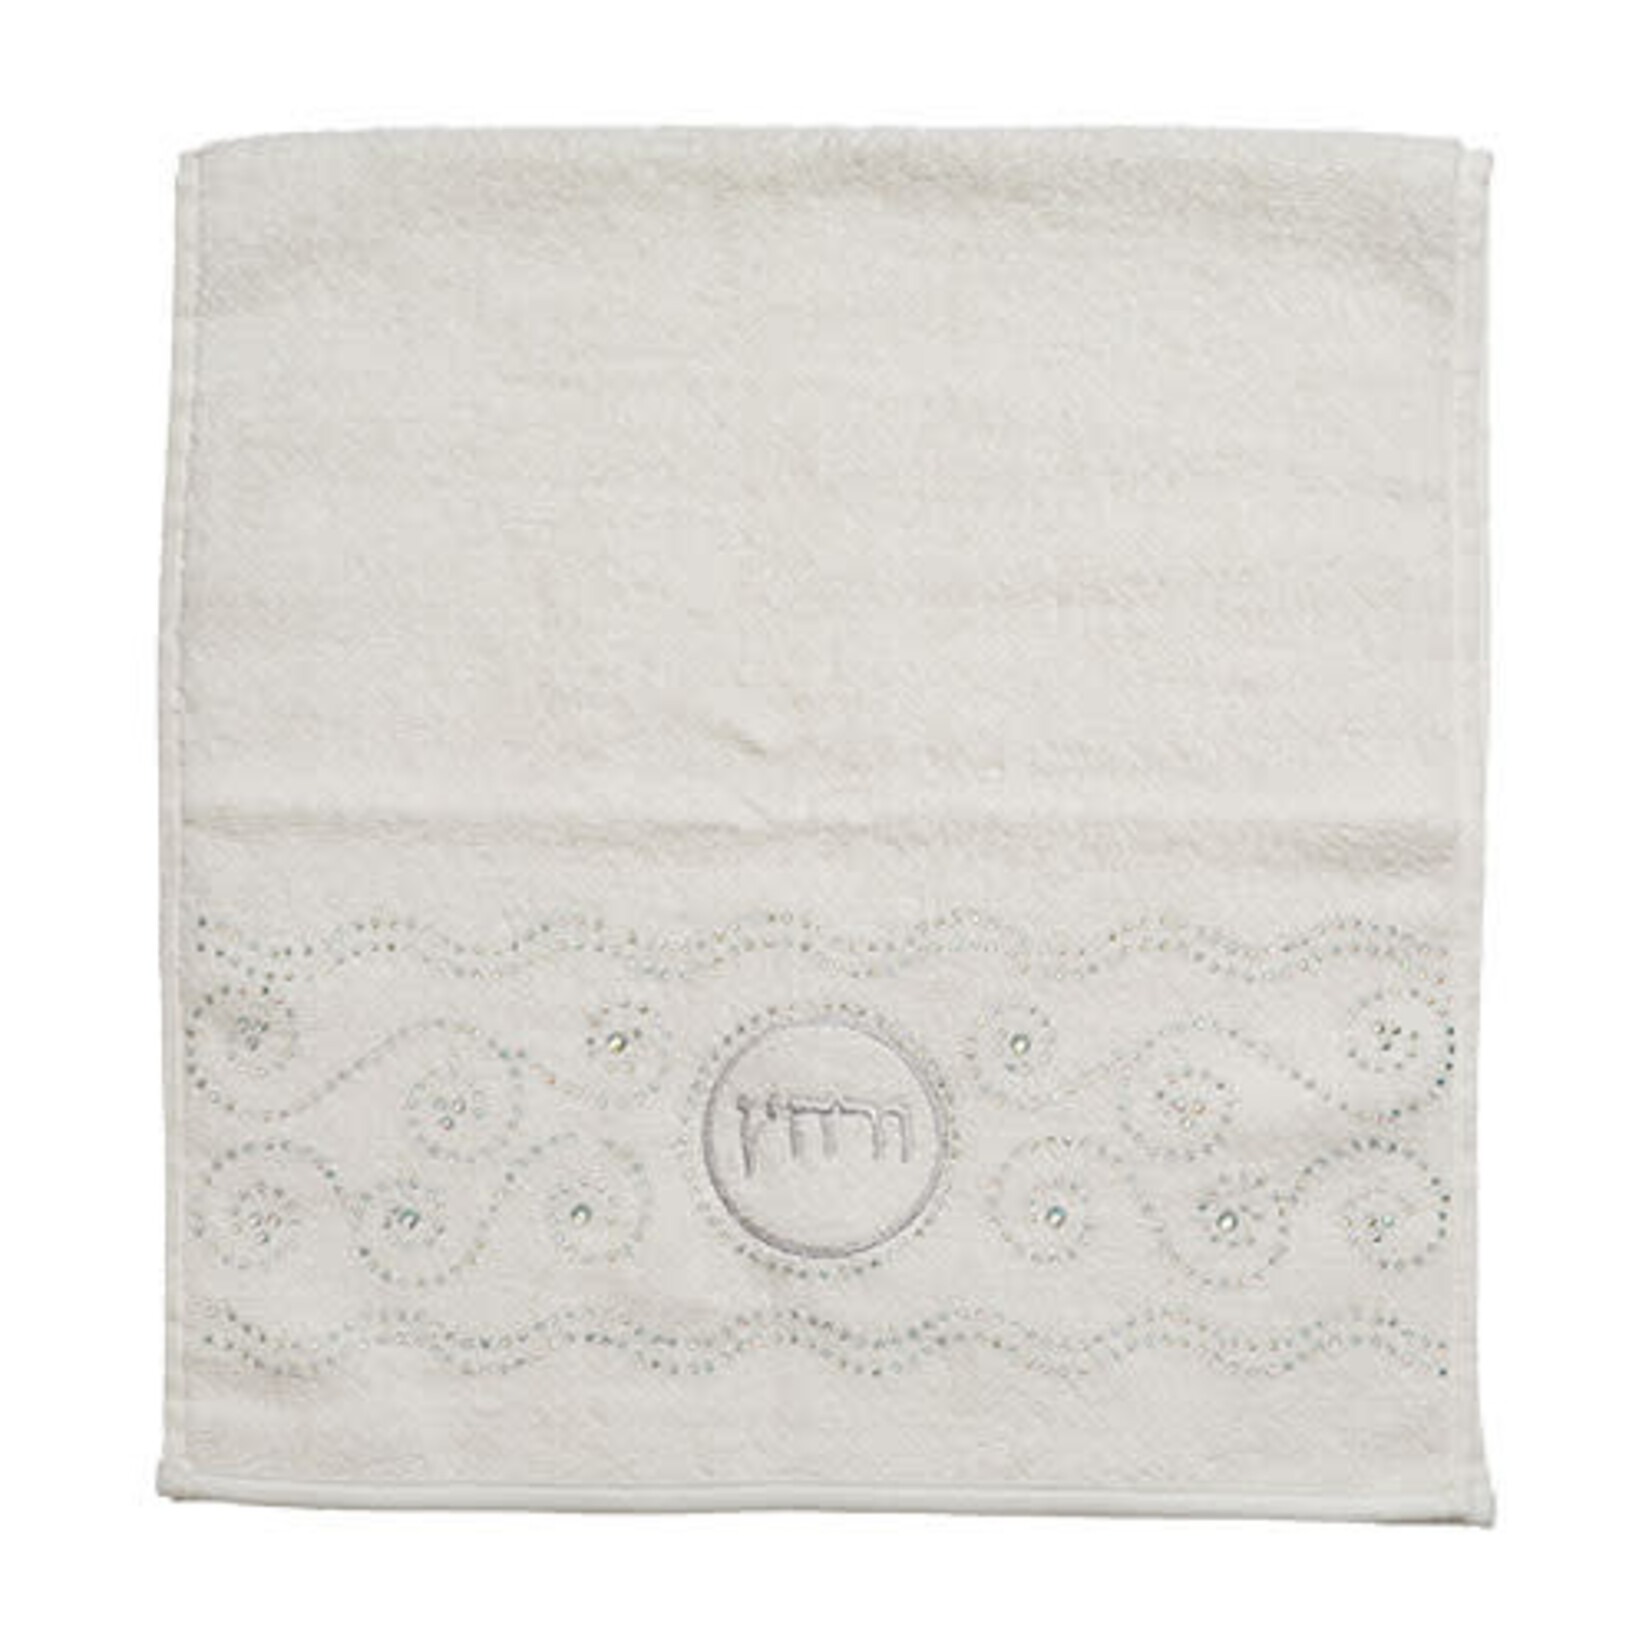 Pair of White Urchatz Towels with Decorative Stones